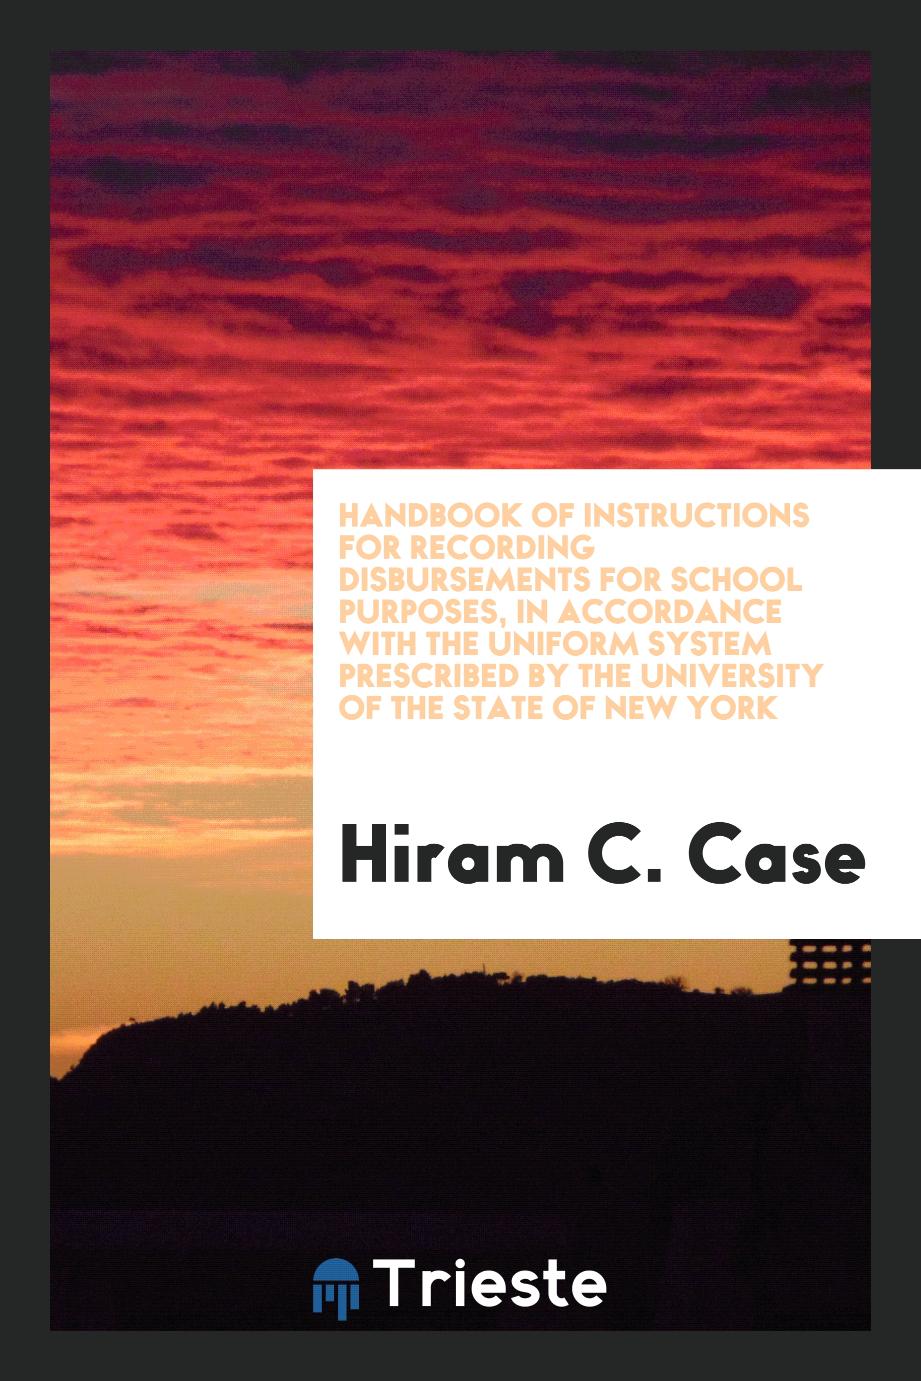 Handbook of instructions for recording disbursements for school purposes, in accordance with the uniform system prescribed by the University of the state of New York